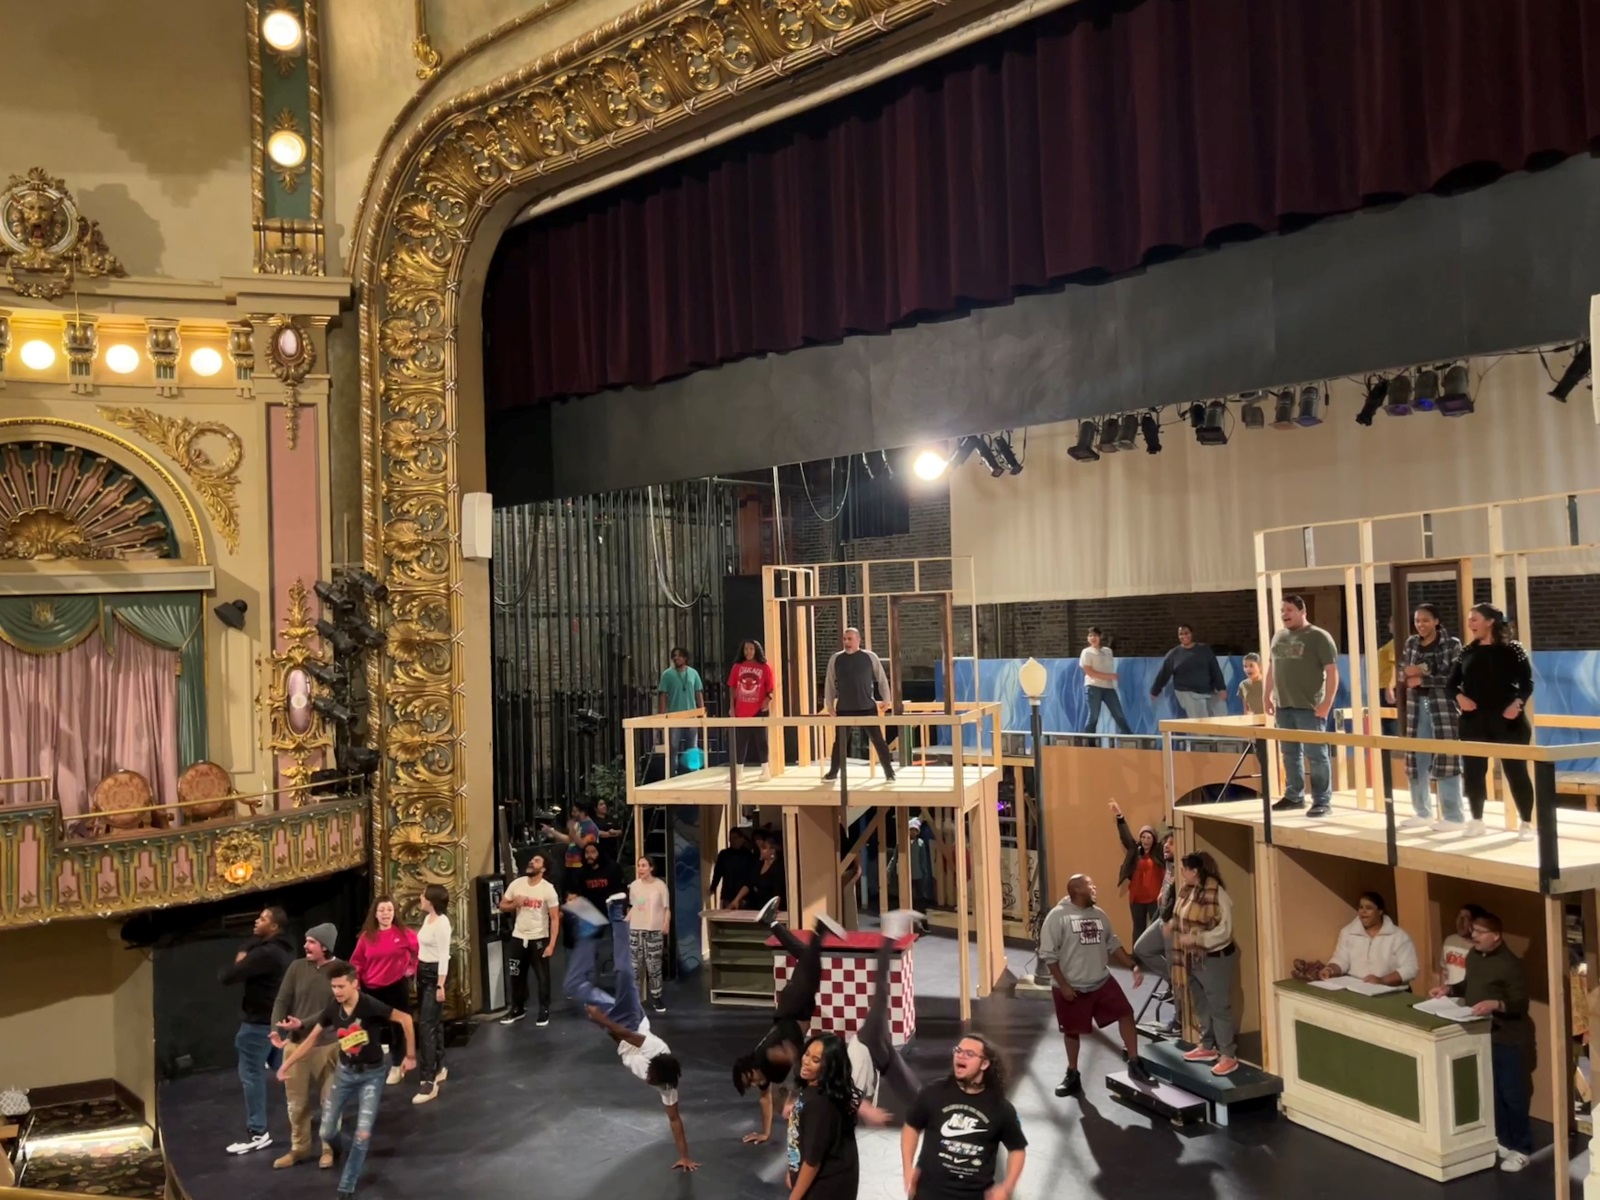 The cast of "In the Heights" rehearses on the Landers Theatre stage